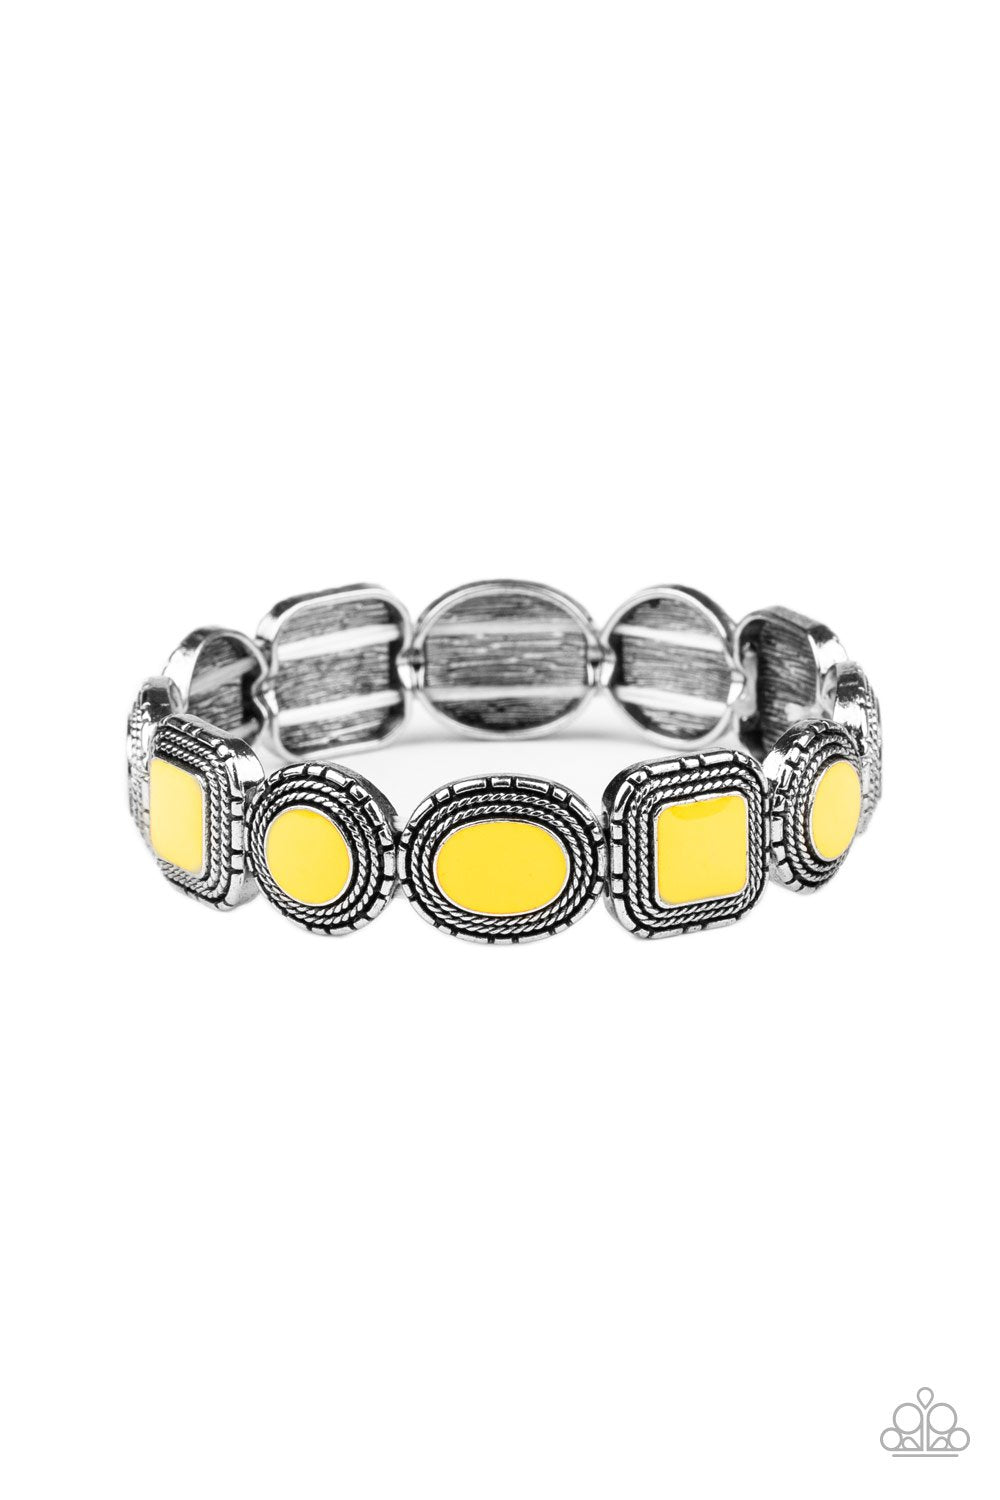 Vividly Vintage Yellow and Silver Bracelet - Paparazzi Accessories-CarasShop.com - $5 Jewelry by Cara Jewels